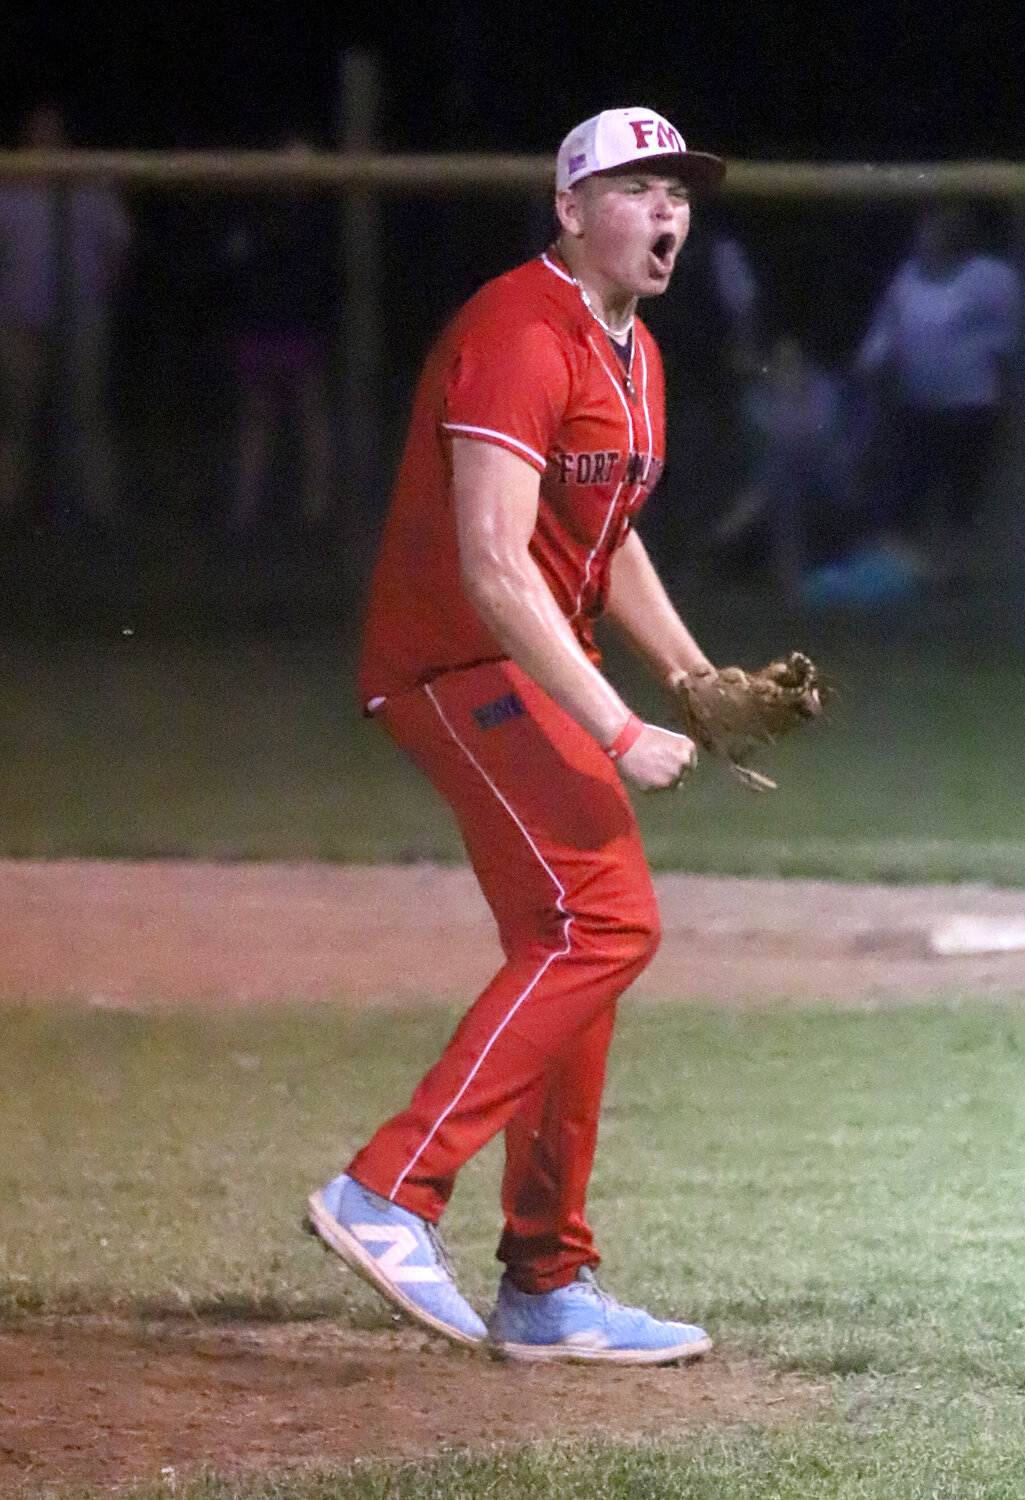 Fort Madison senior Hunter Cresswell reacts after striking out Central Lee's Gage Van Ausdall to preserve a 2-1 Fort Madison win Monday night in Fort Madison.  Cresswell relieved Luke Hellige in the top of the 5th to get the win.